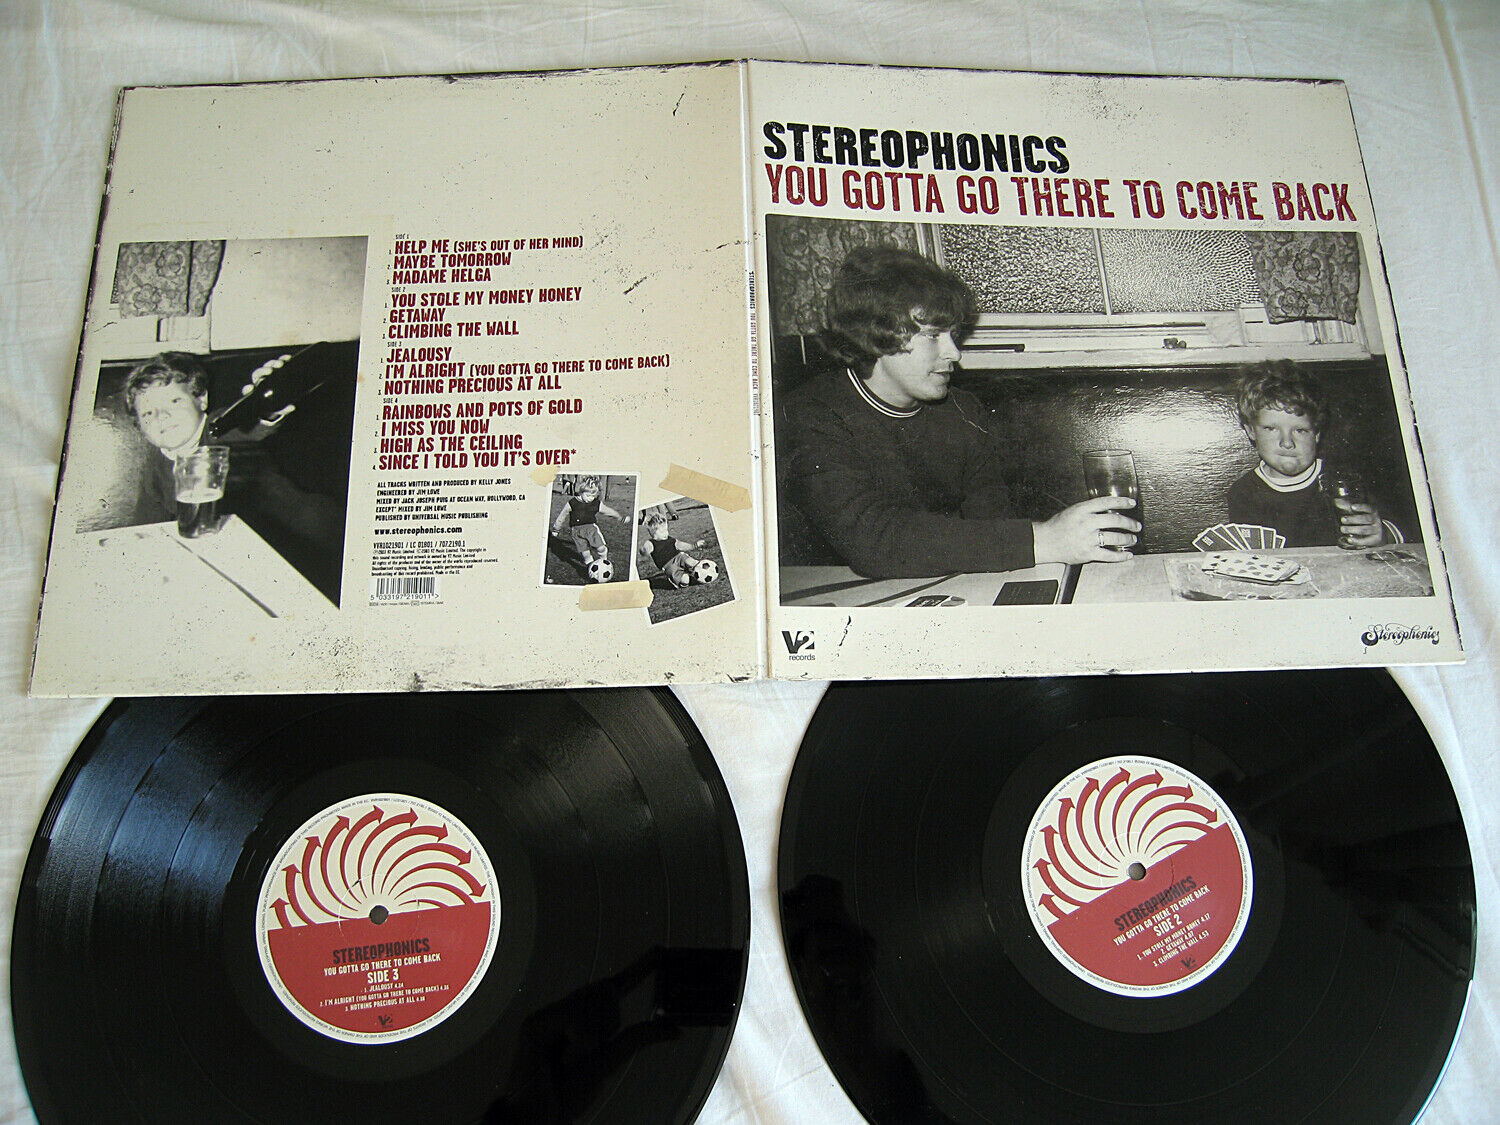 popsike.com - STEREOPHONICS You Gotta Go There To Come Back - 2003 